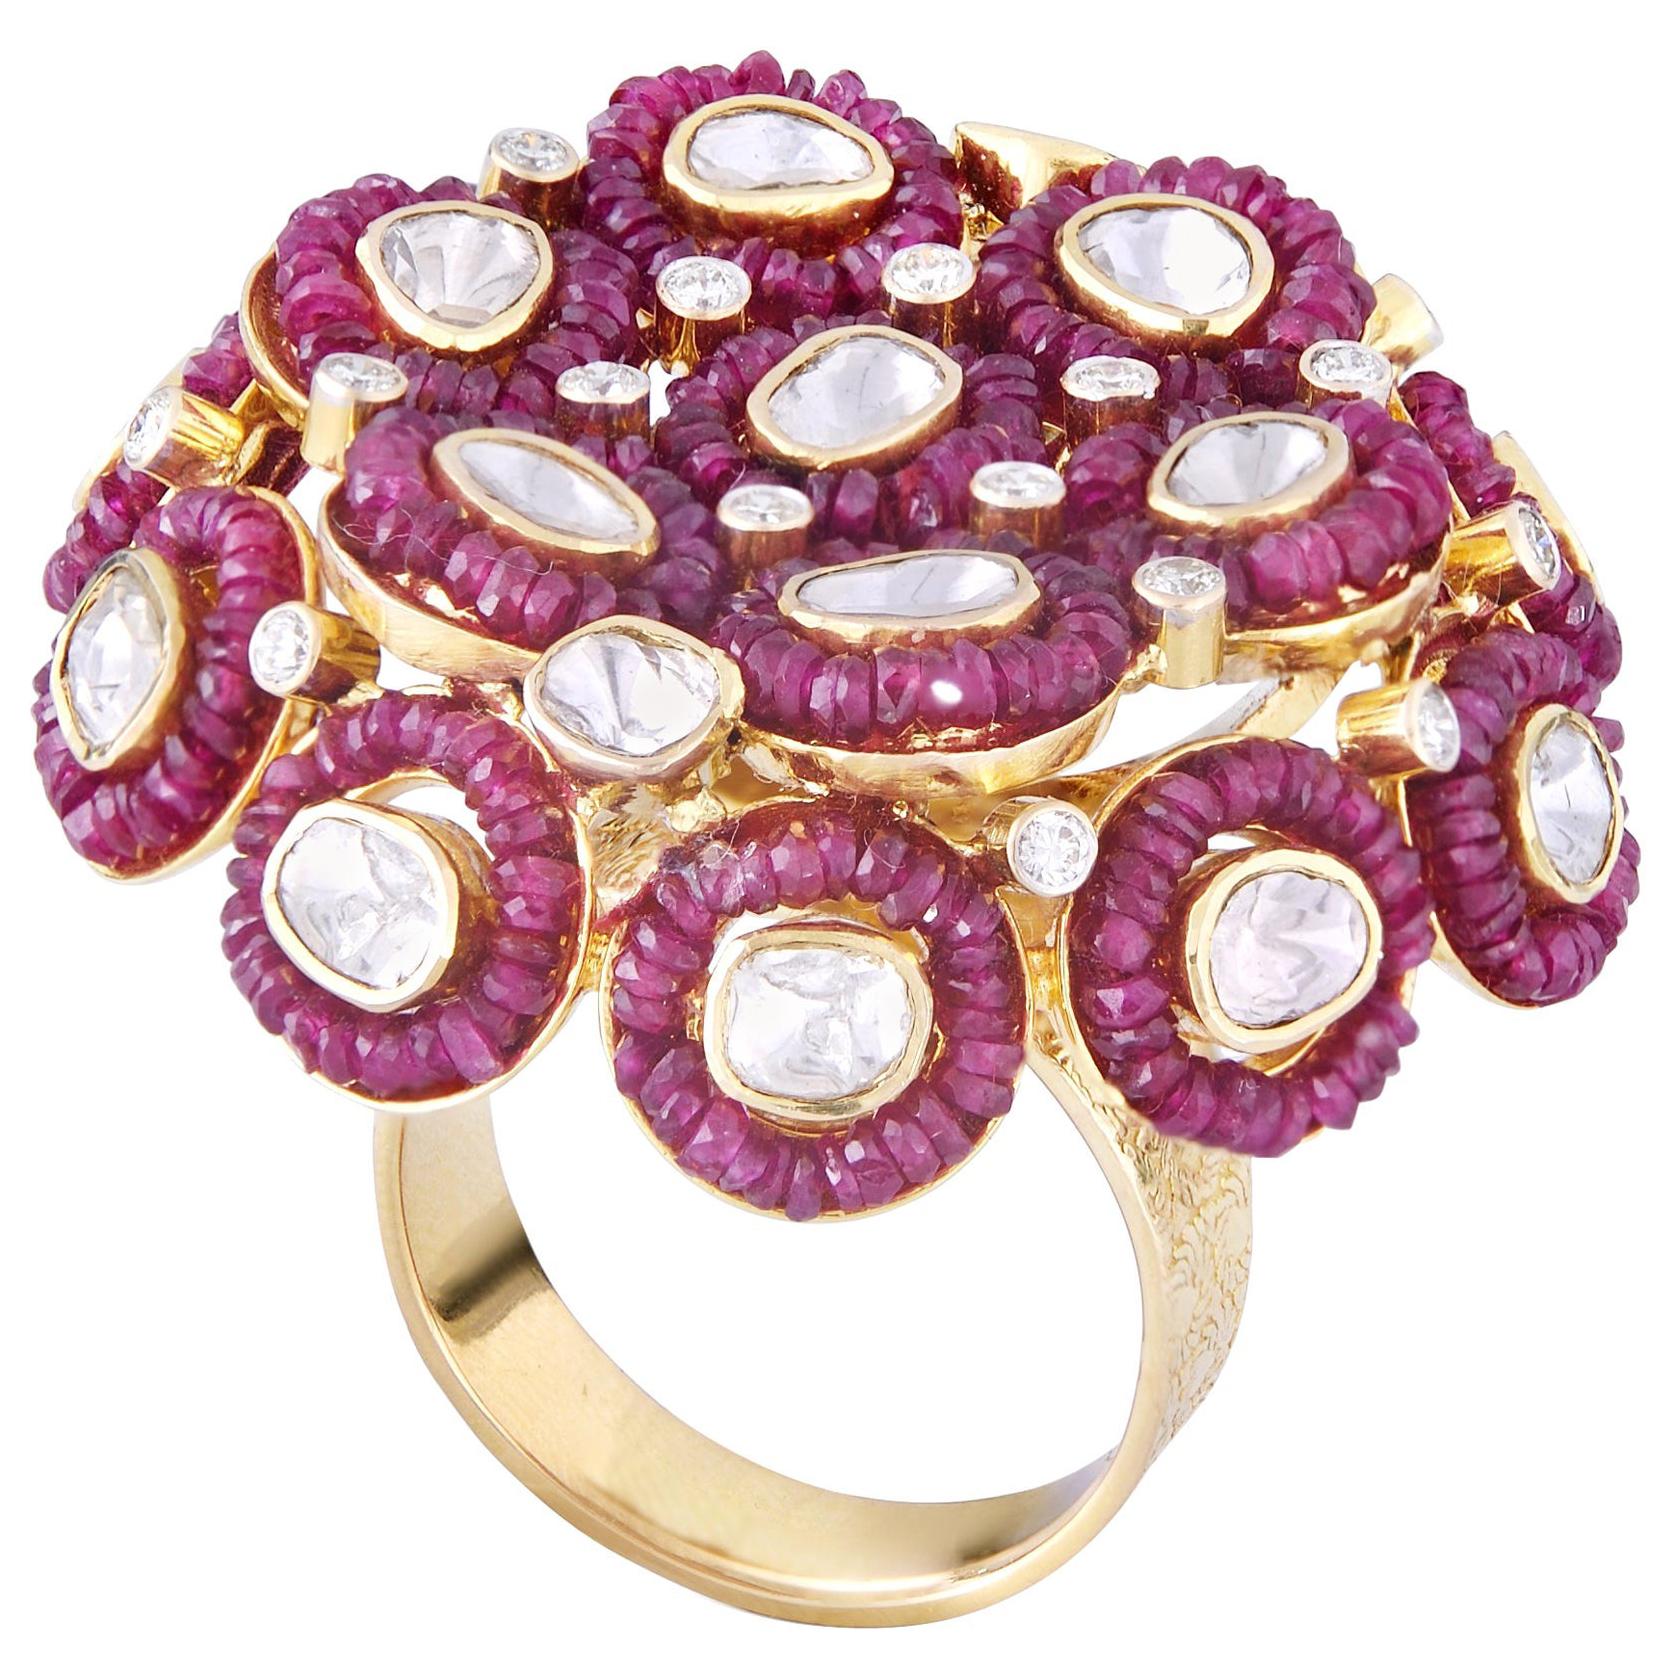 Ruby Beads 18k Gold Uncut Diamond Cocktail Ring